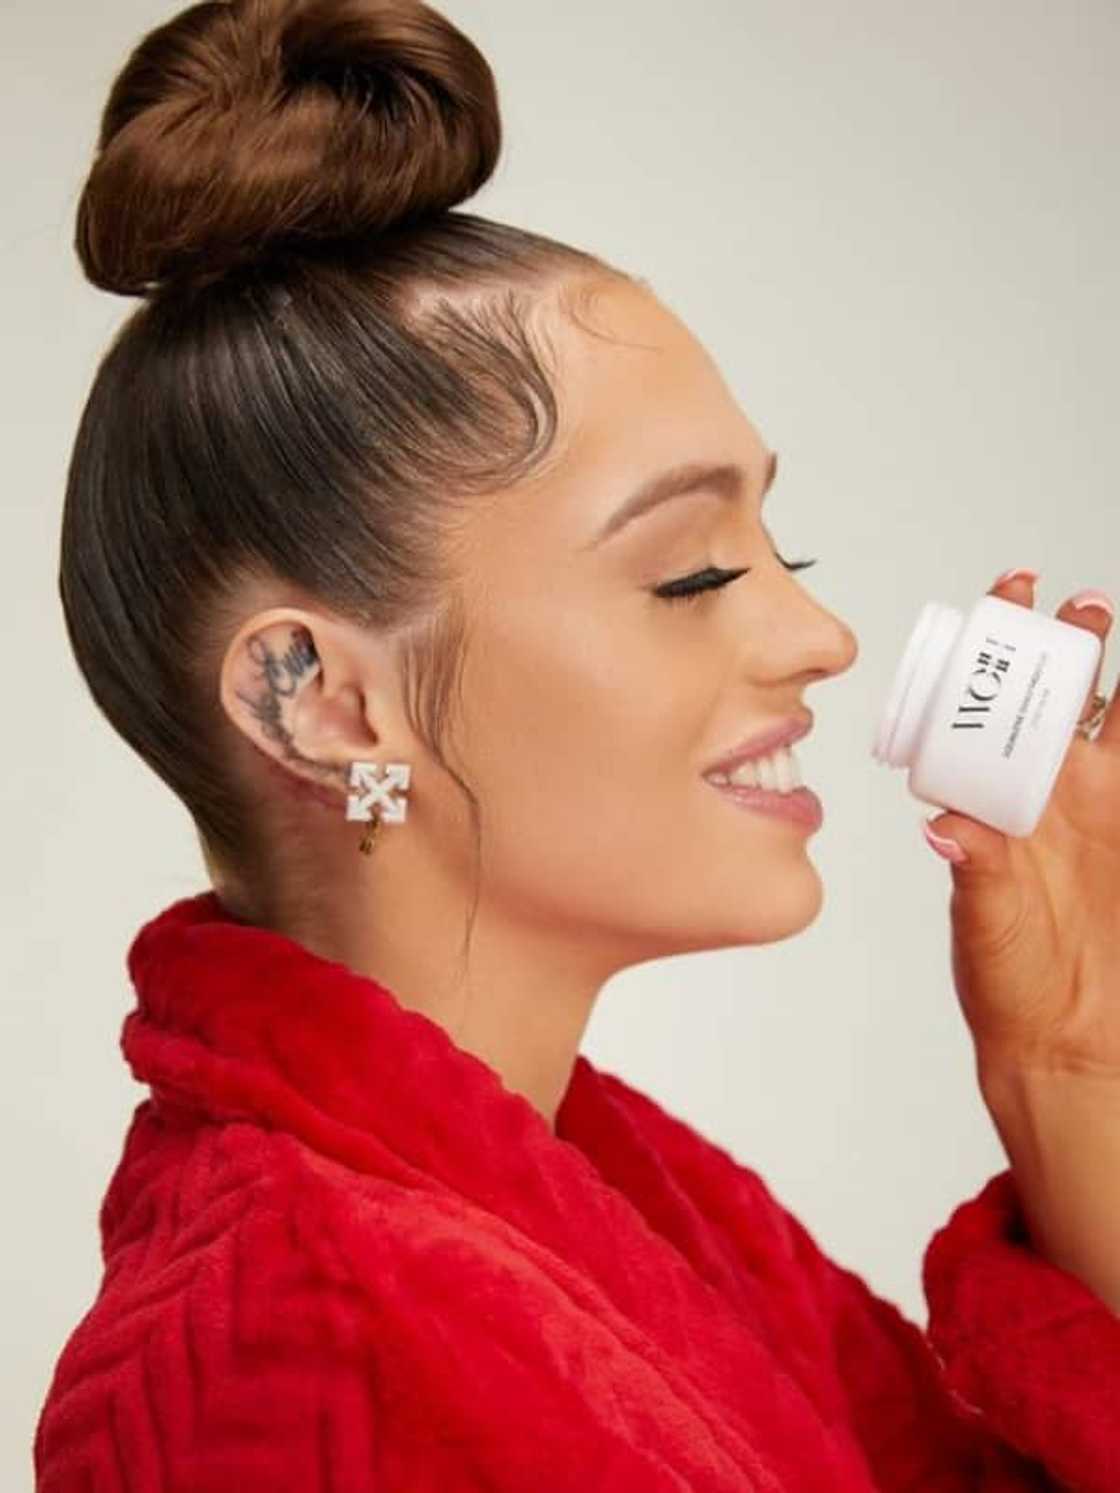 Woah Vicky with one of her skincare products from her range called WoahSkin.